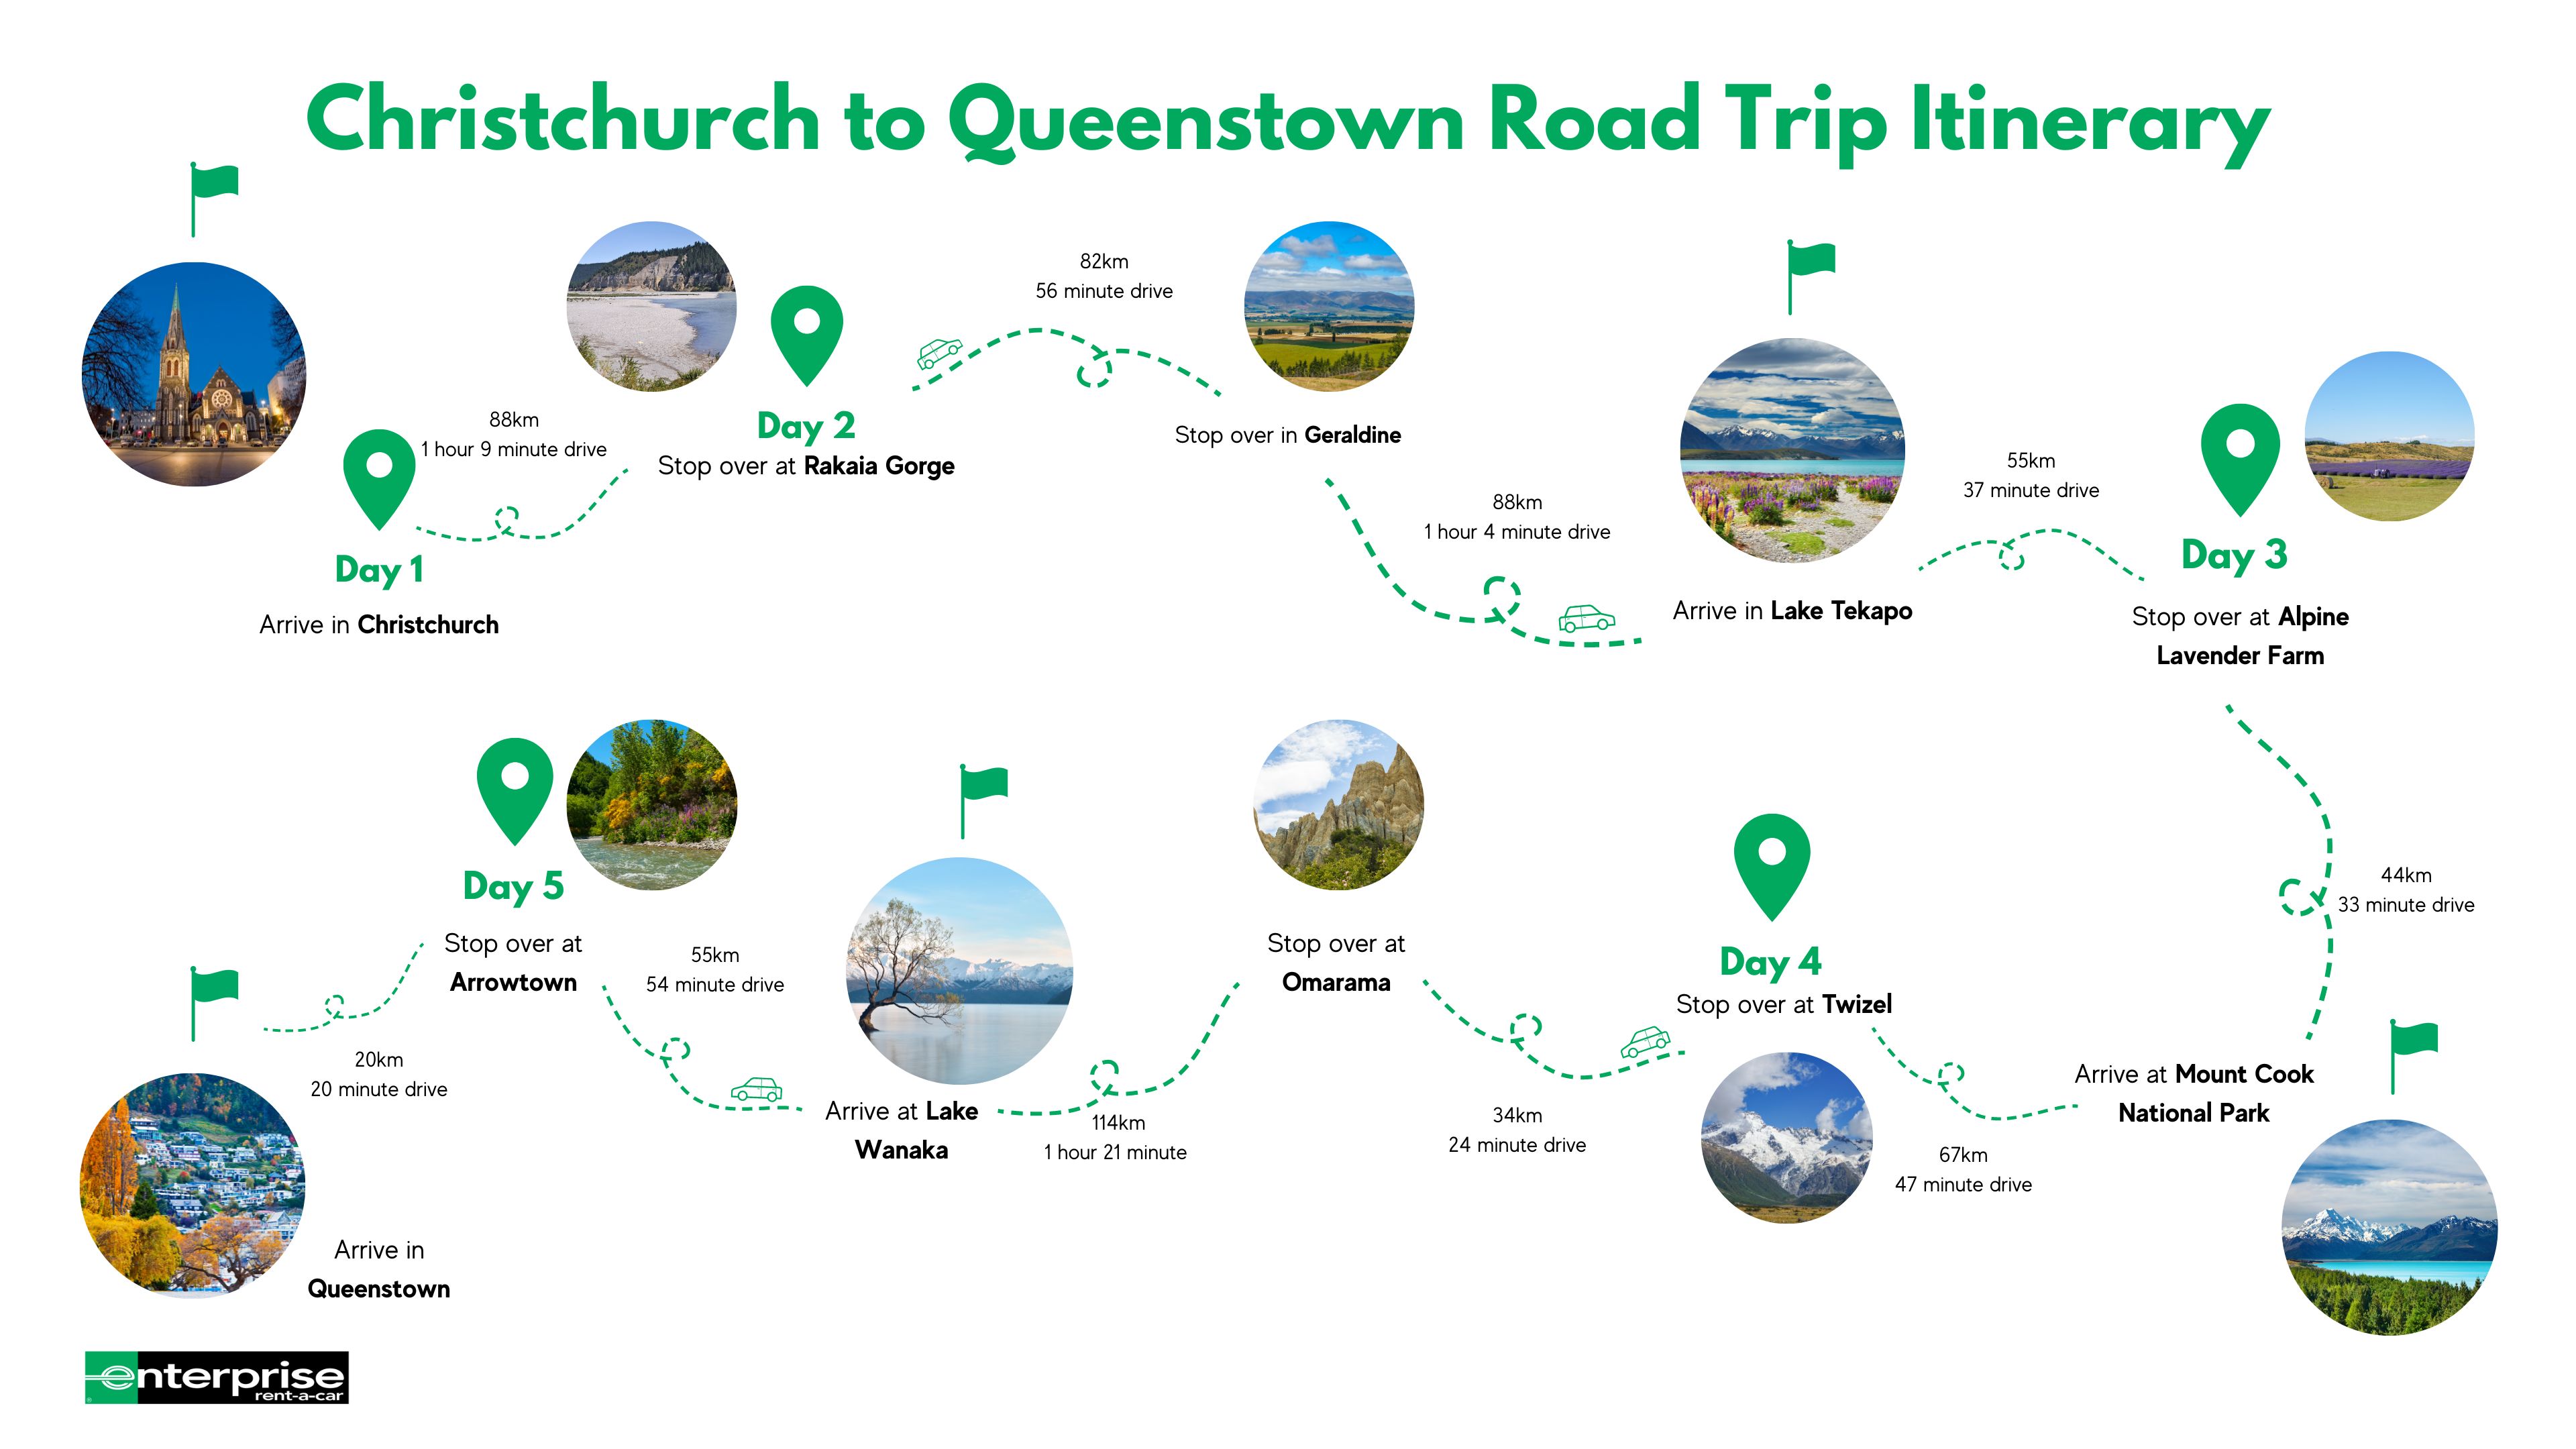 Christchurch to Queenstown road trip itinerary